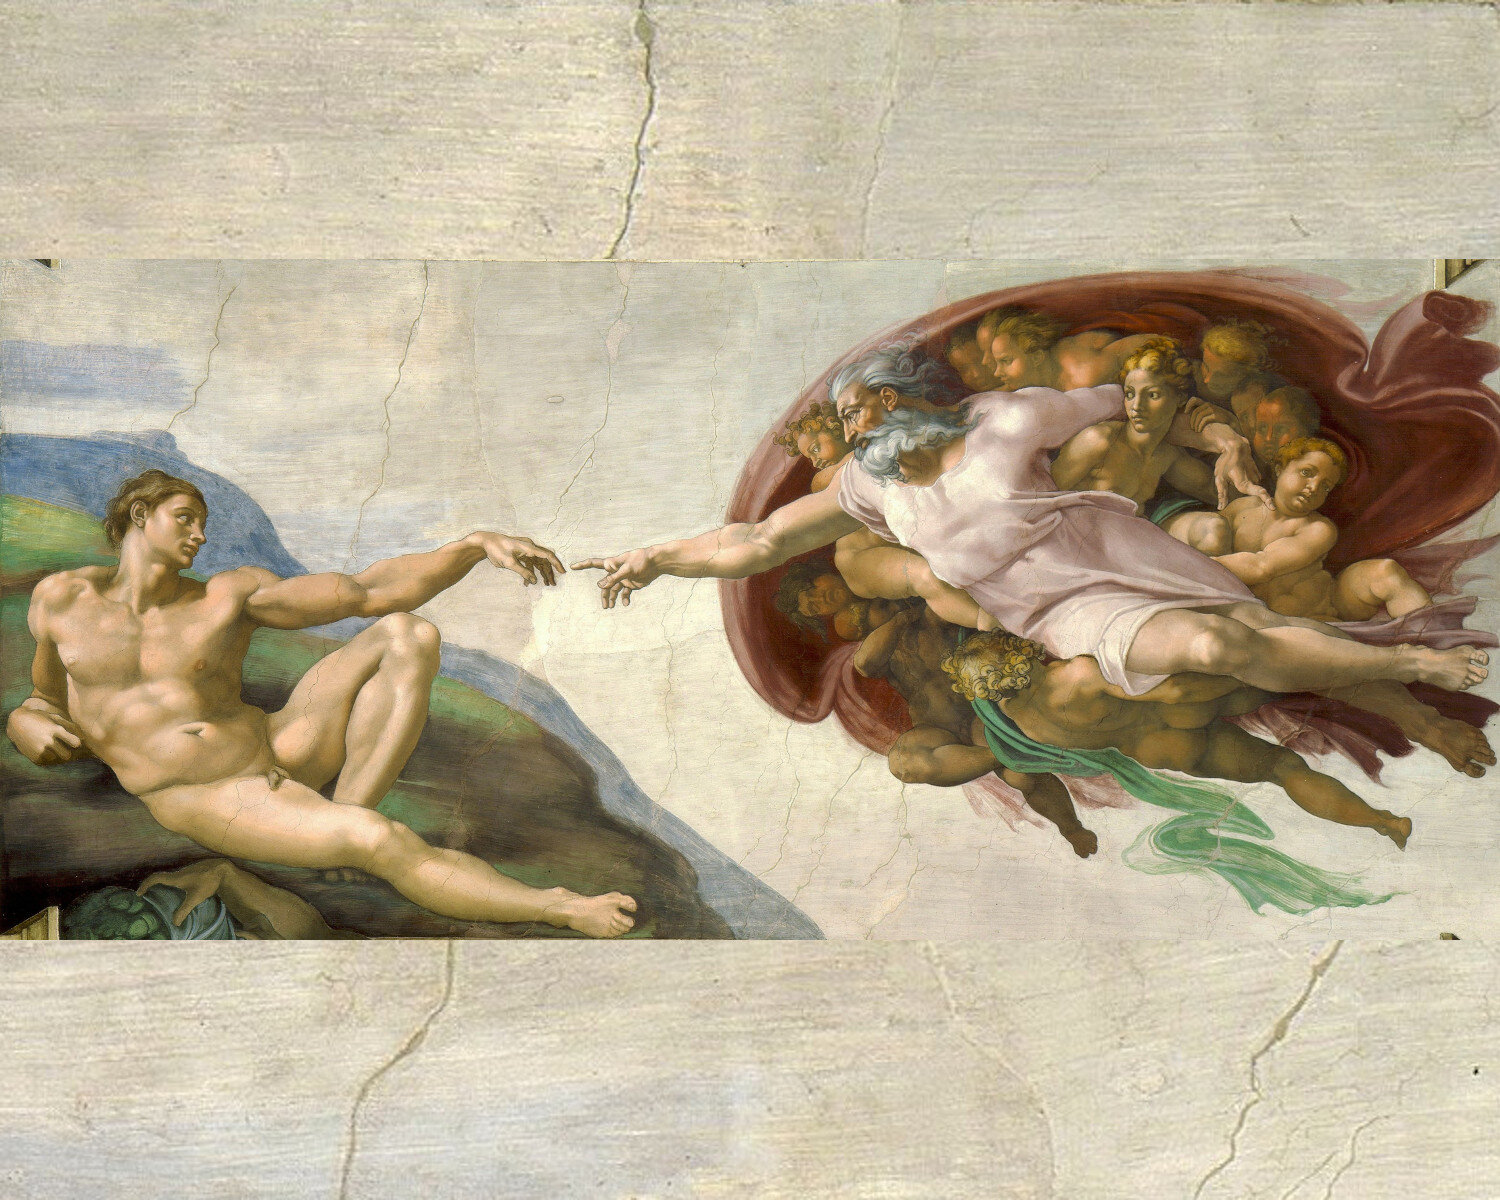 Michelangelo and the Hand of God: Scandal at the Vatican